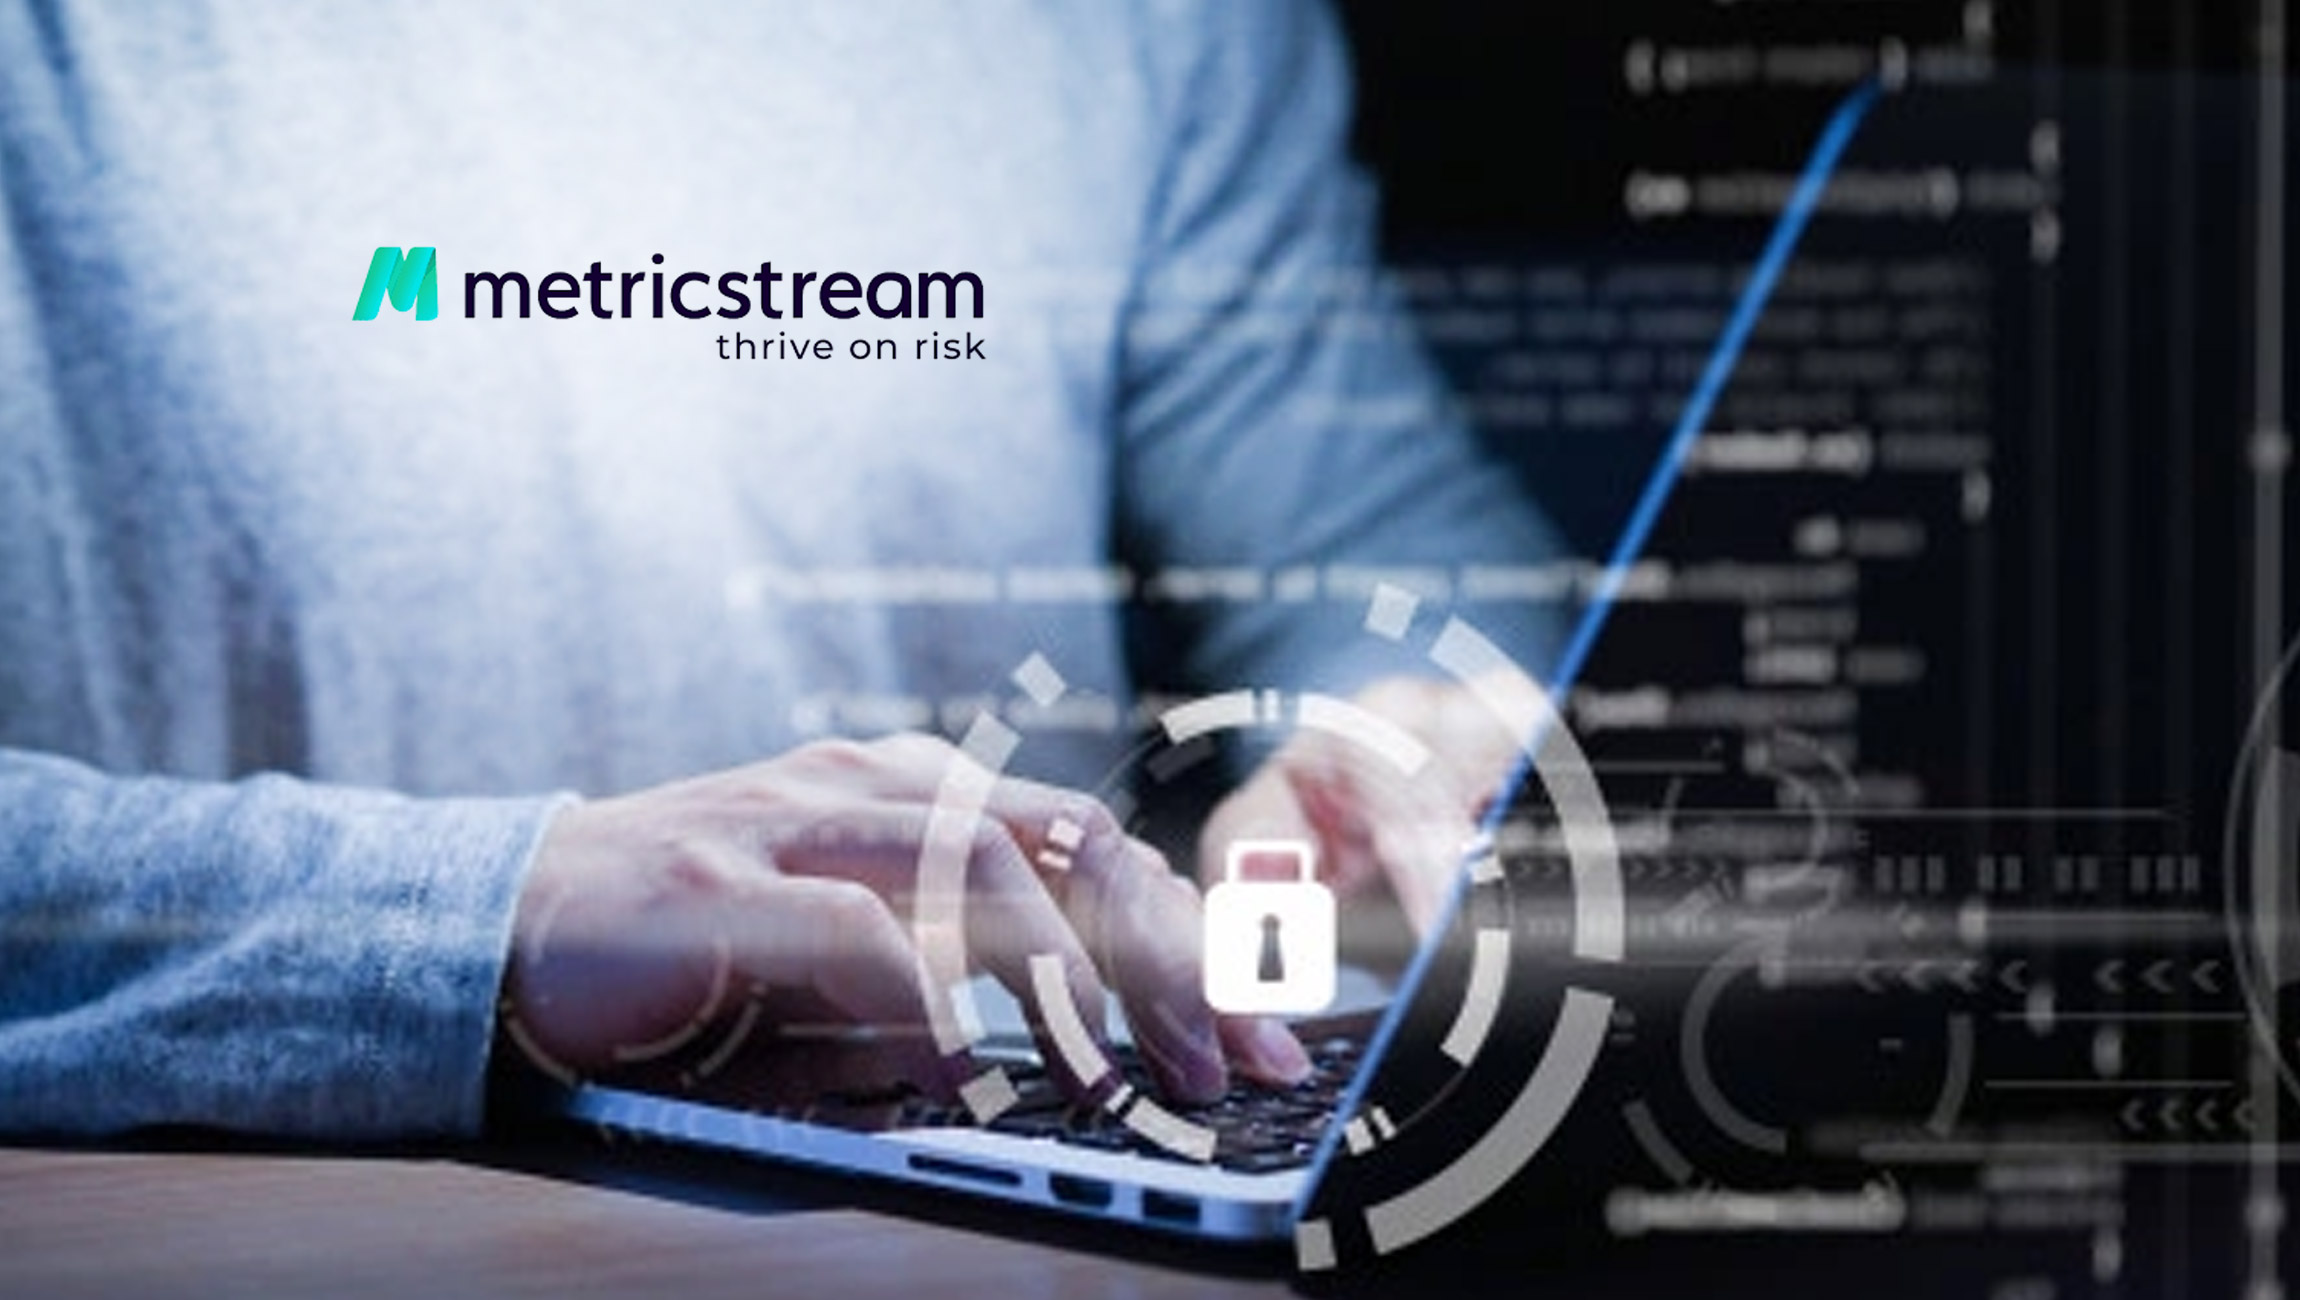 MetricStream Recognized as a Leader in the 2021 Gartner® Magic Quadrant™ for IT Risk Management Tools